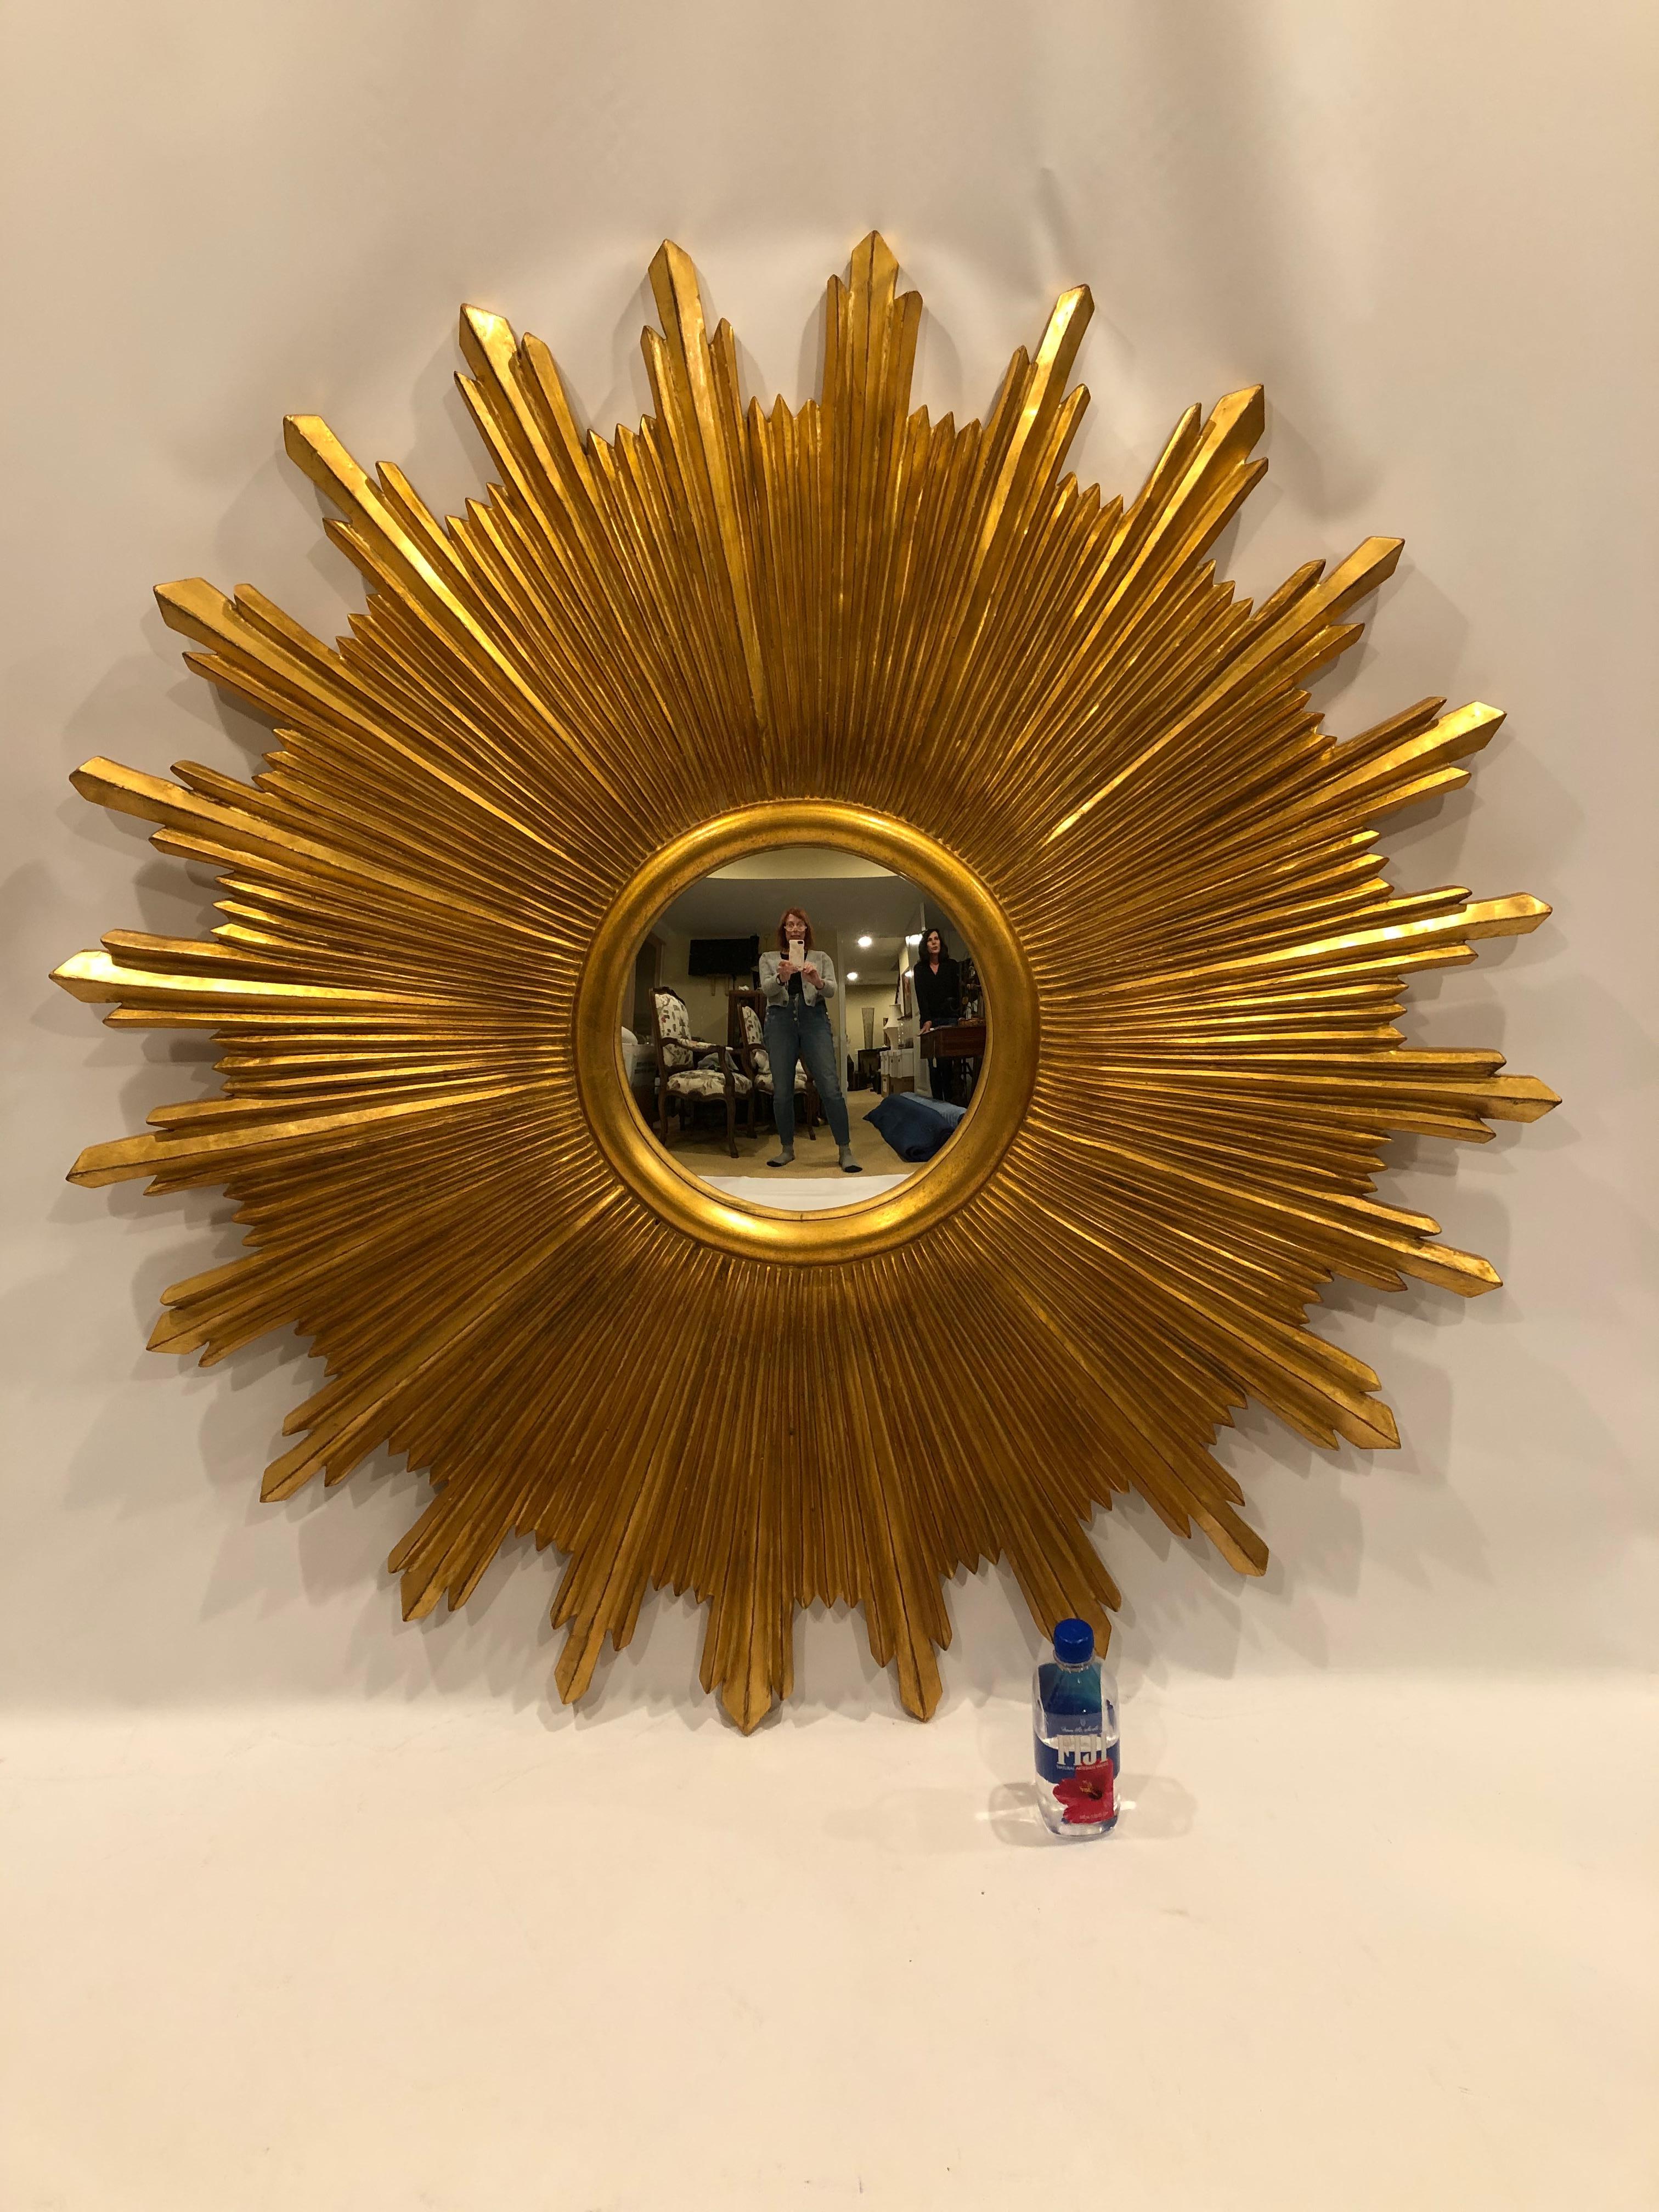 Super huge and movie star glamorous sunburst mirror having eye popping gilded rays beautifully crafted by Carvers Guild with 12